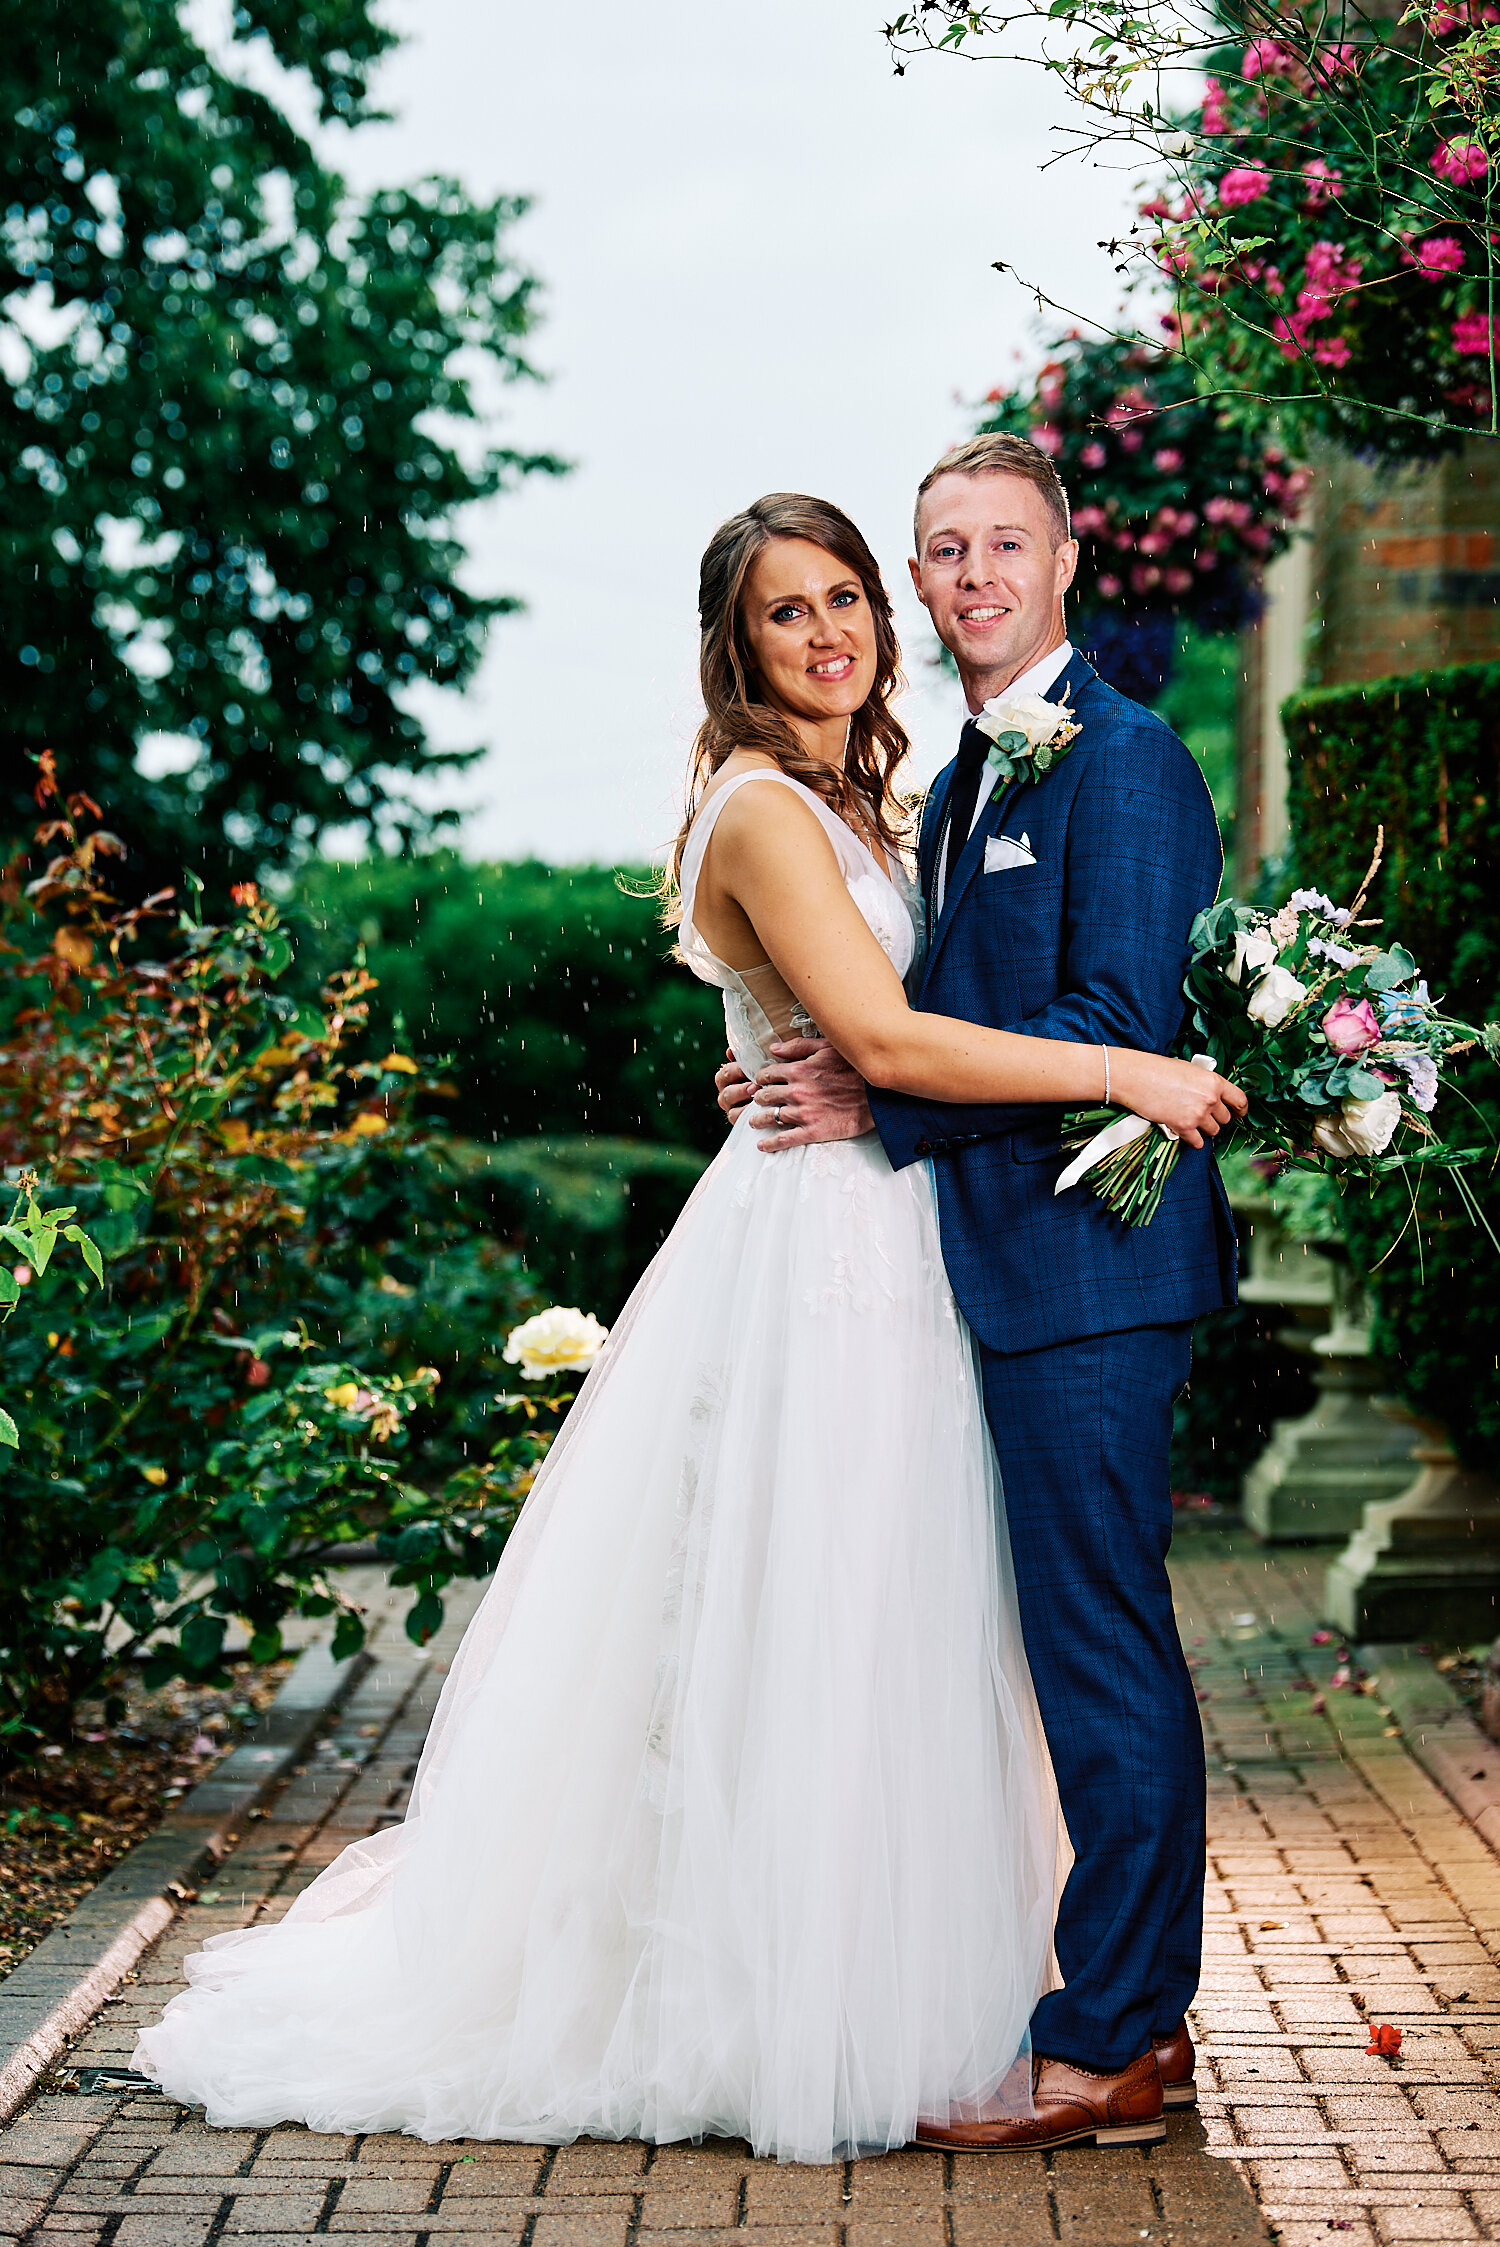 1SMALL-wedding-photography-st-albans-registry-office-pike-photography_27.jpg